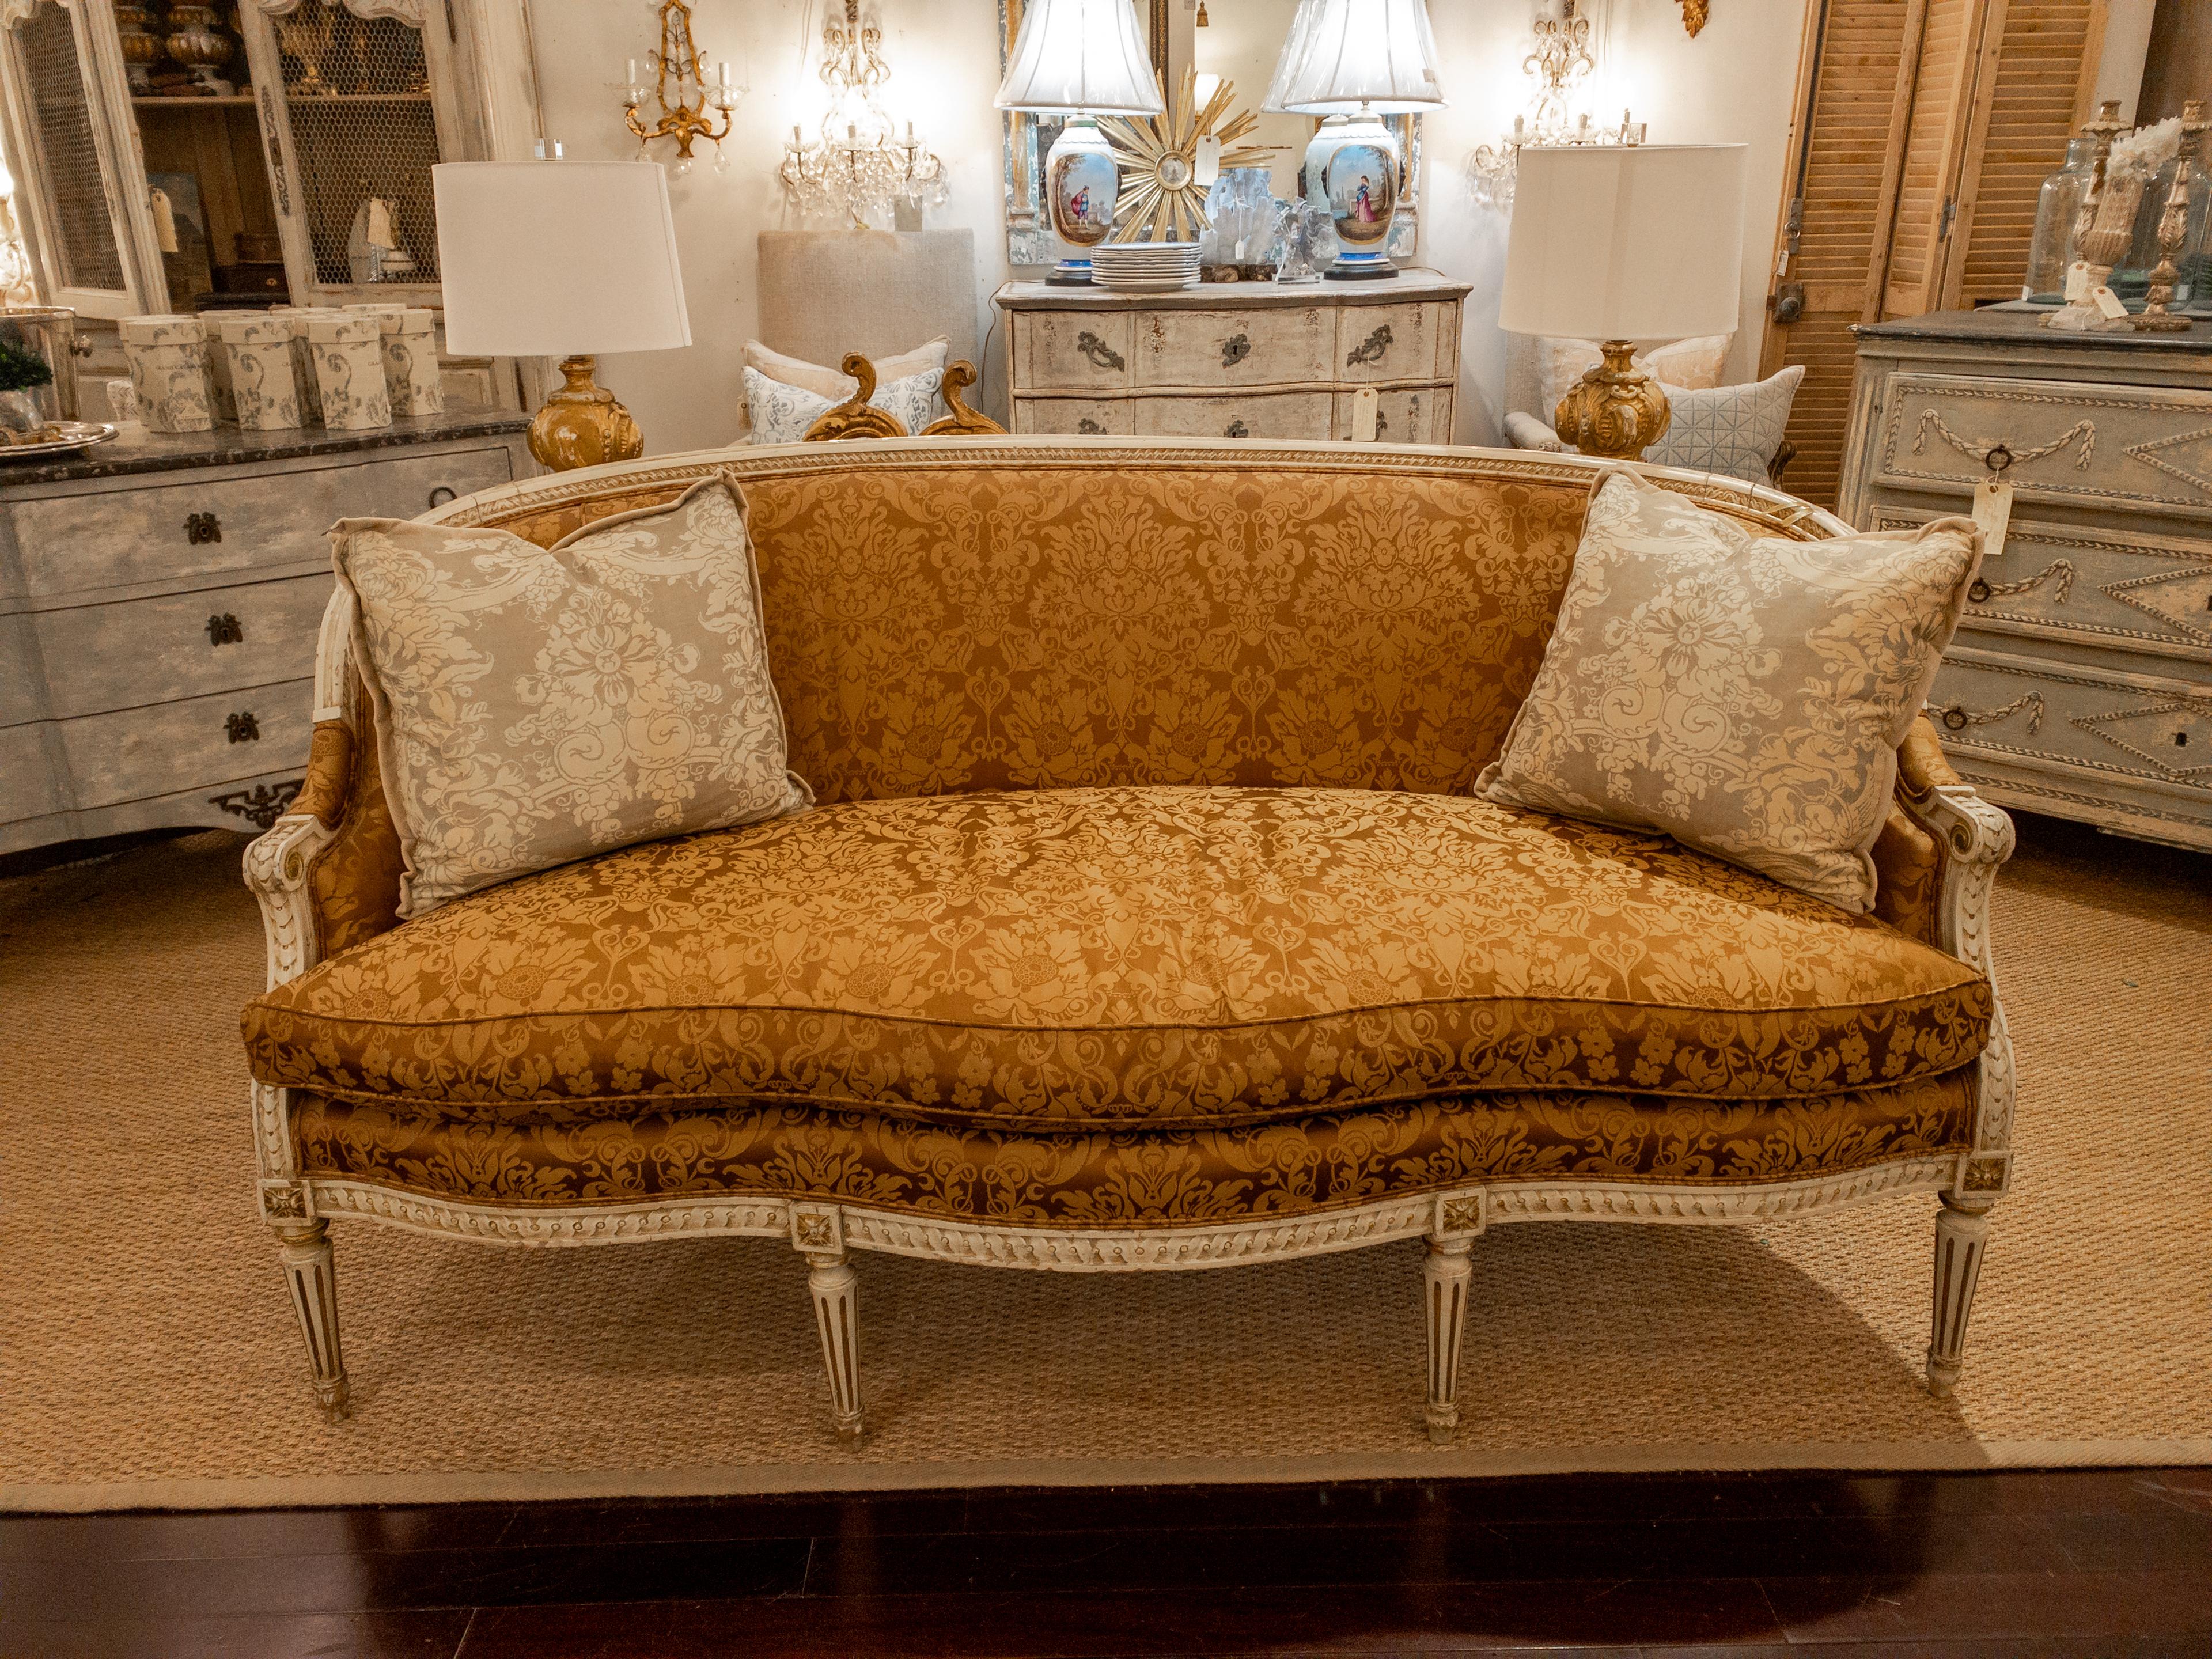 The 19th Century Louis XVI Style Painted Settee is a striking piece of furniture that exudes elegance and charm. Its serpentine front shape and rounded backrest are distinctive features that capture the essence of the Louis XVI design aesthetic.